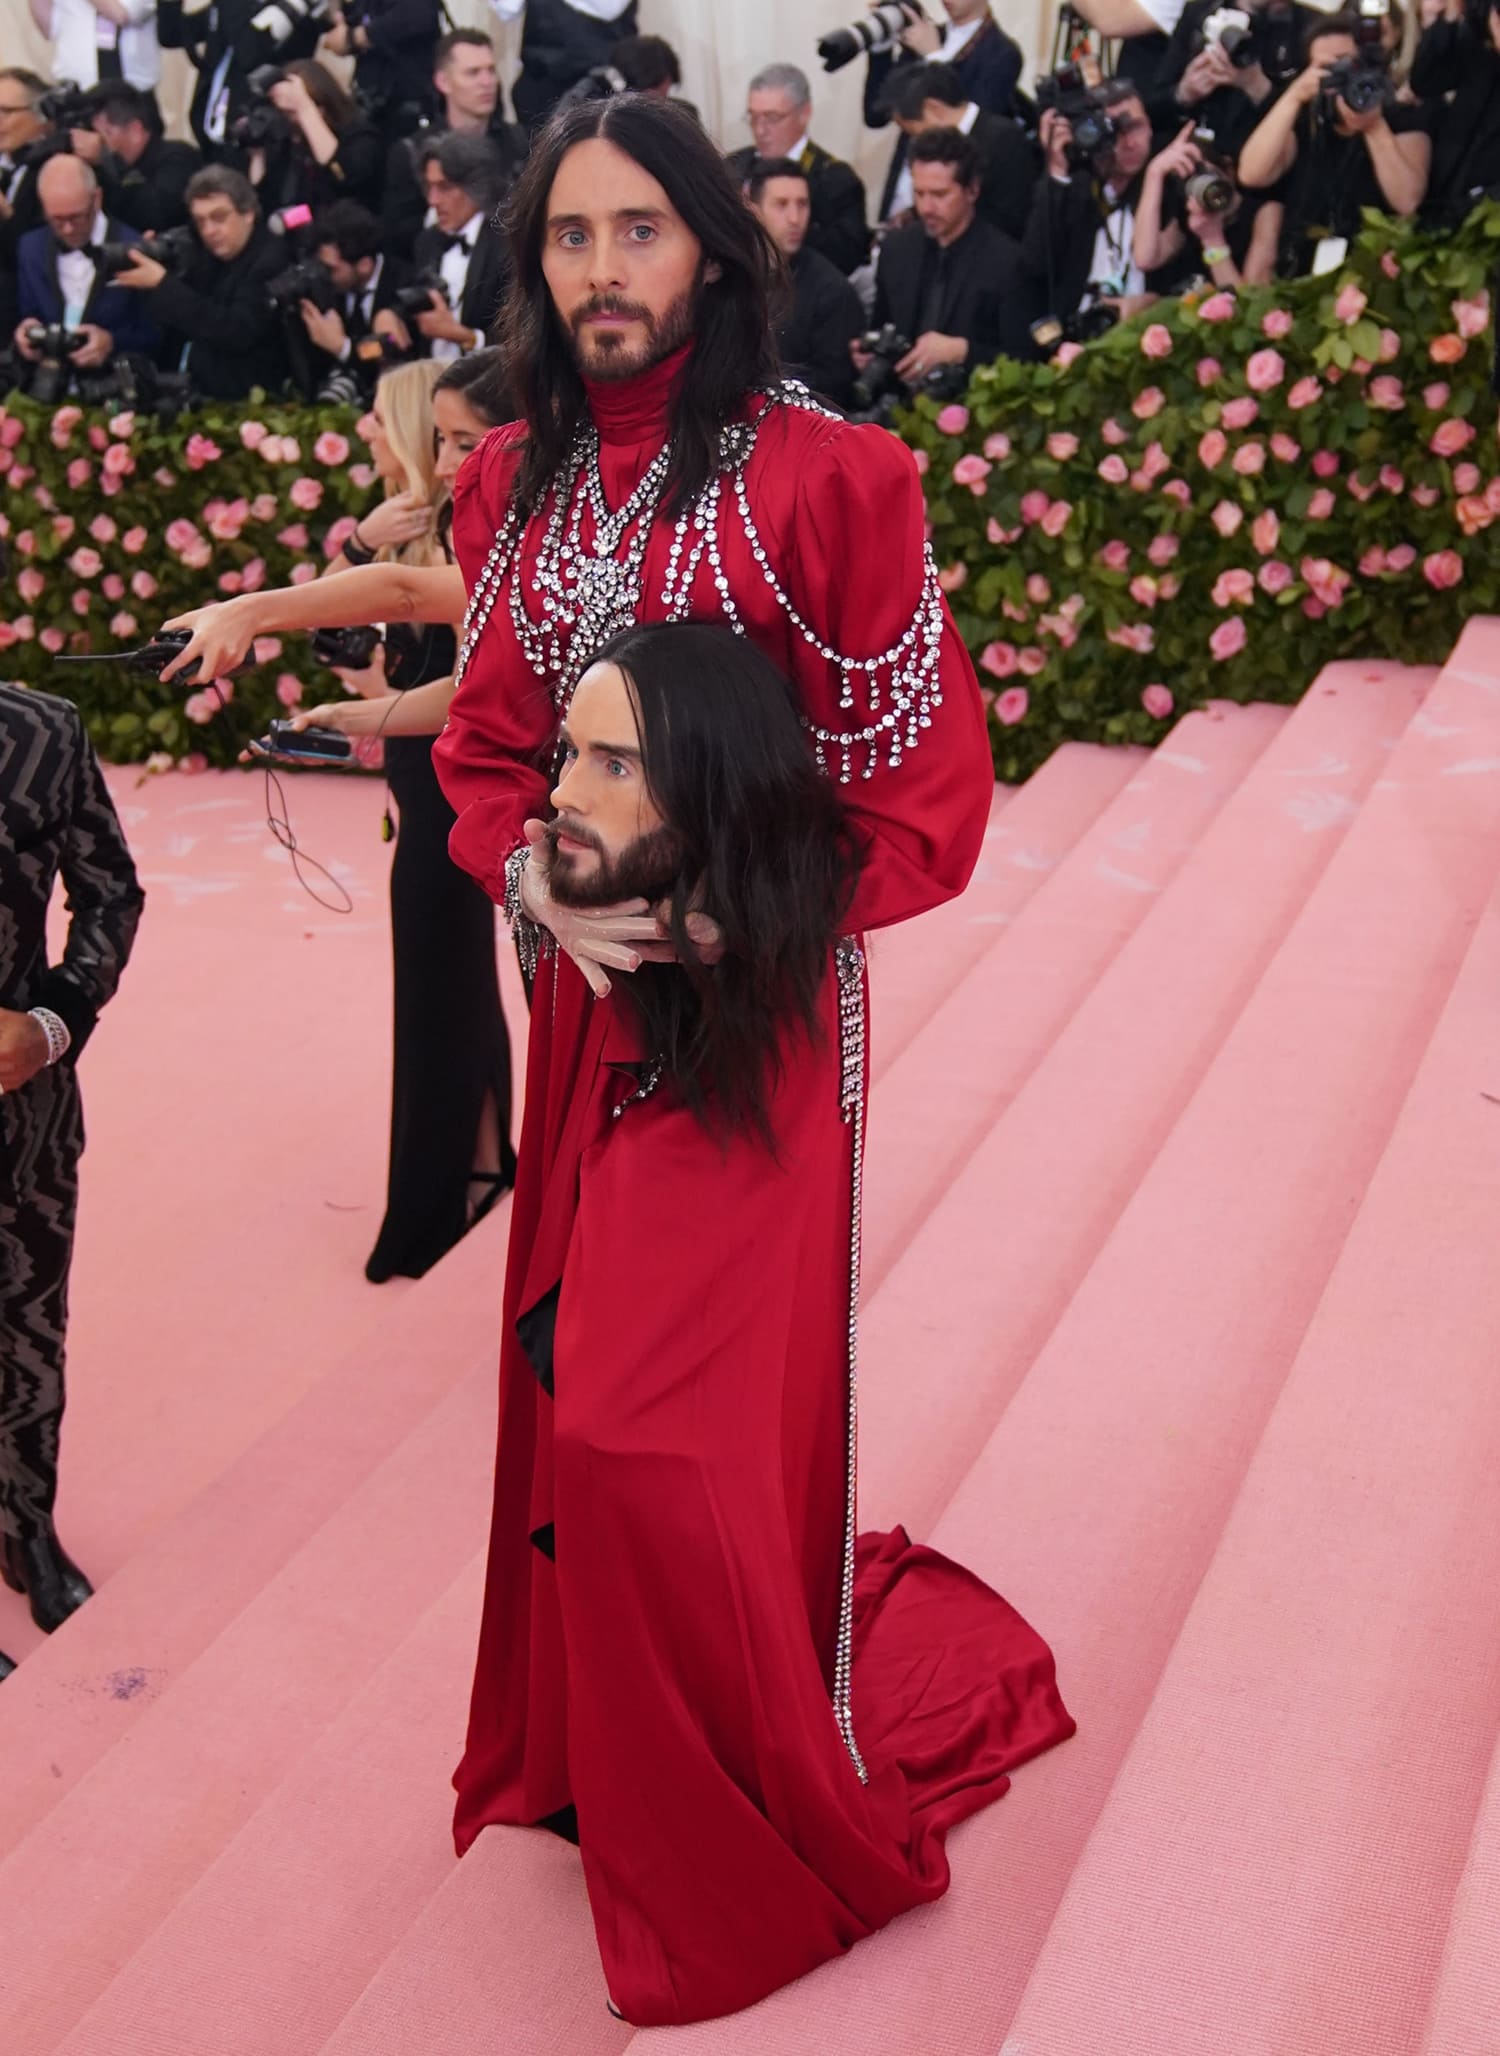 Jared Leto in a Gucci outfit with a wax replica of his head at the 2019 Met Gala